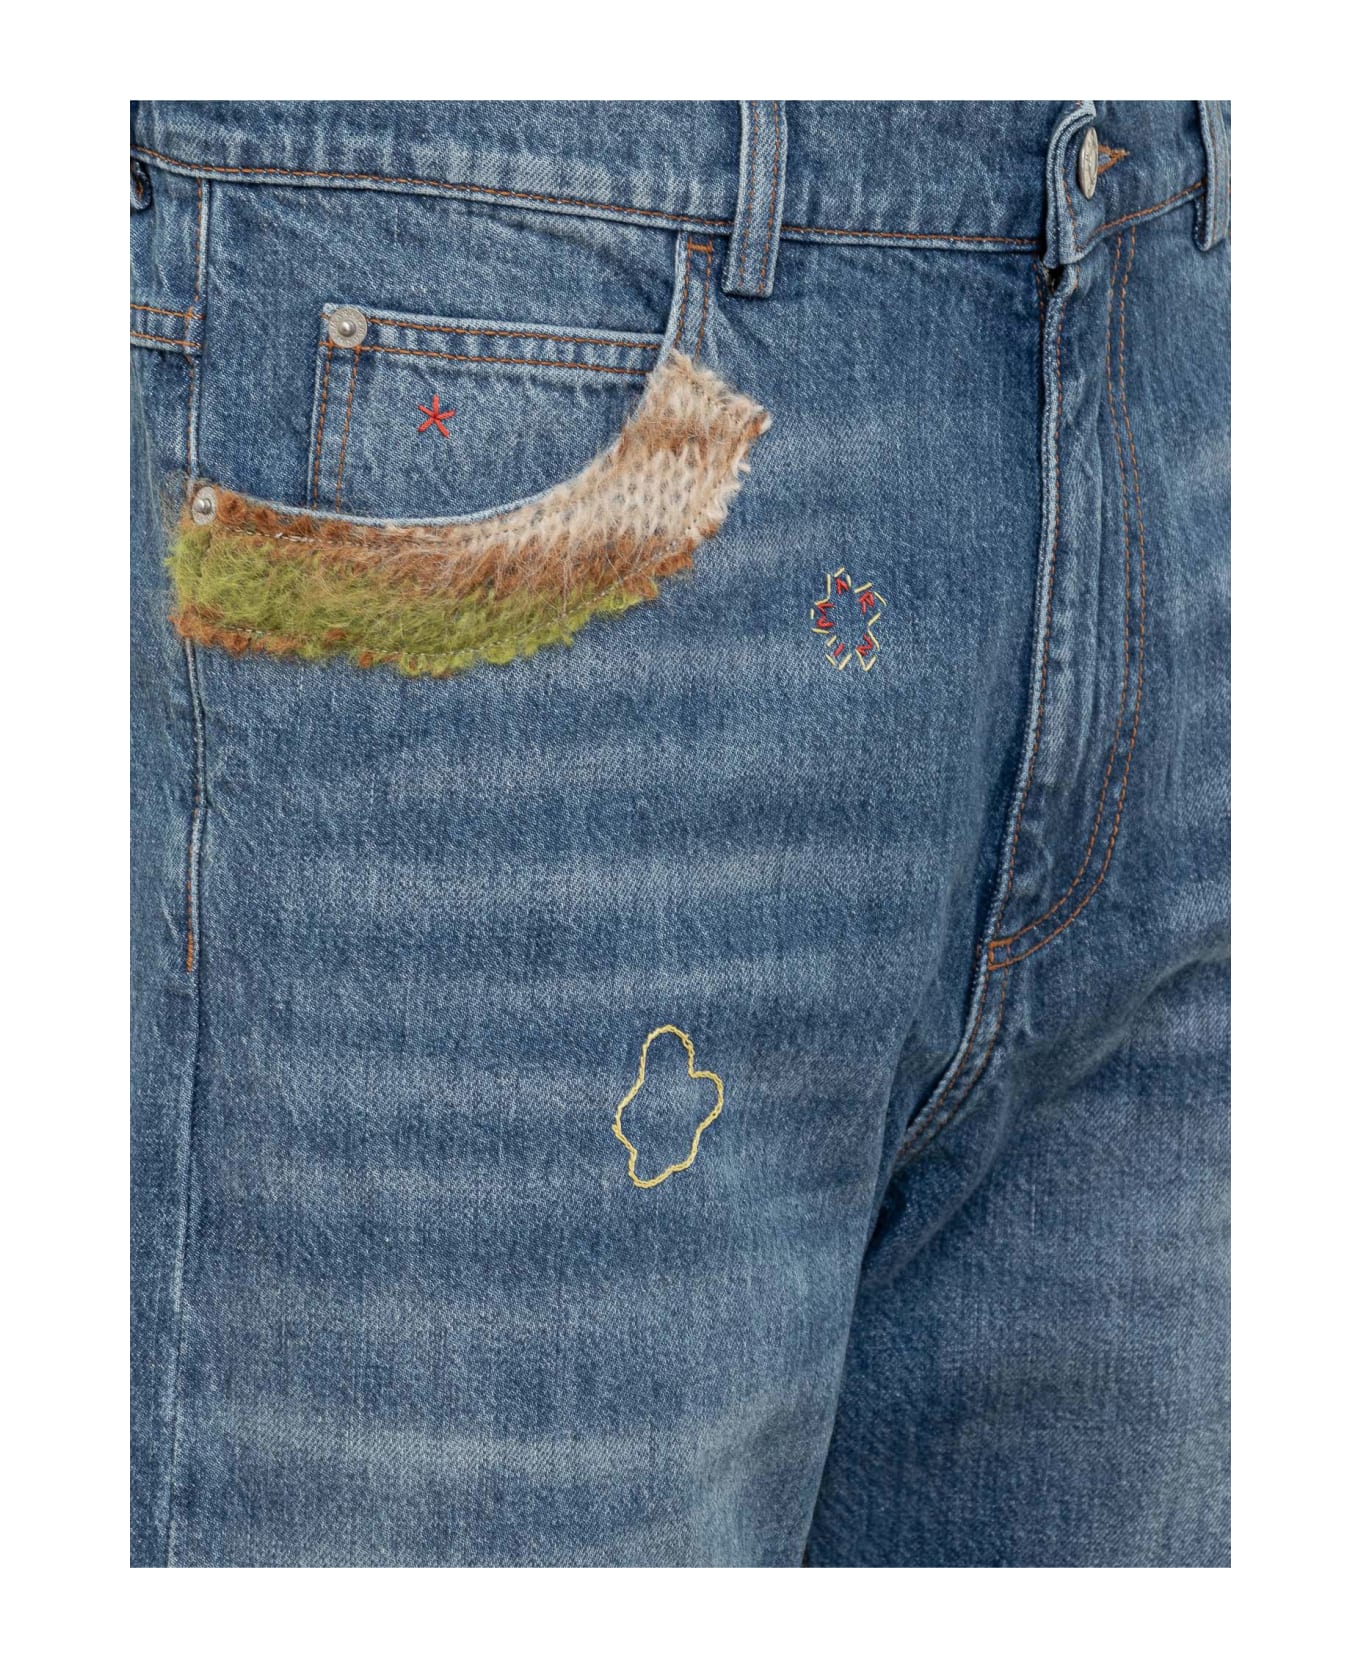 Marni Jeans With Patches - IRIS BLUE デニム